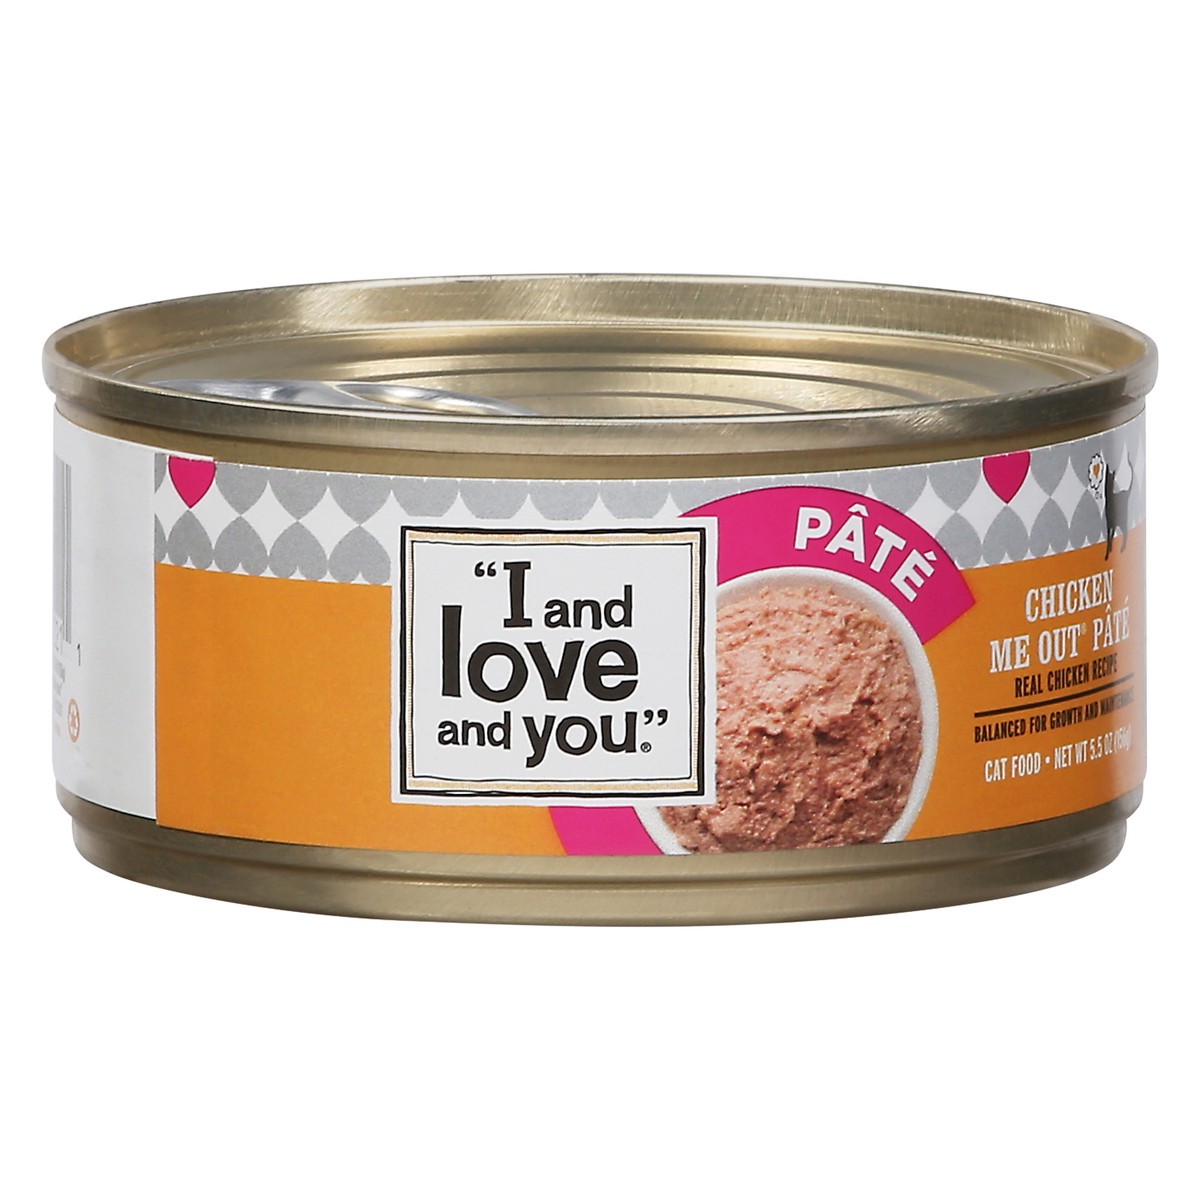 slide 7 of 15, I and Love and You Chicken Me Out Pate Cat Food 5.5 oz, 5.5 oz